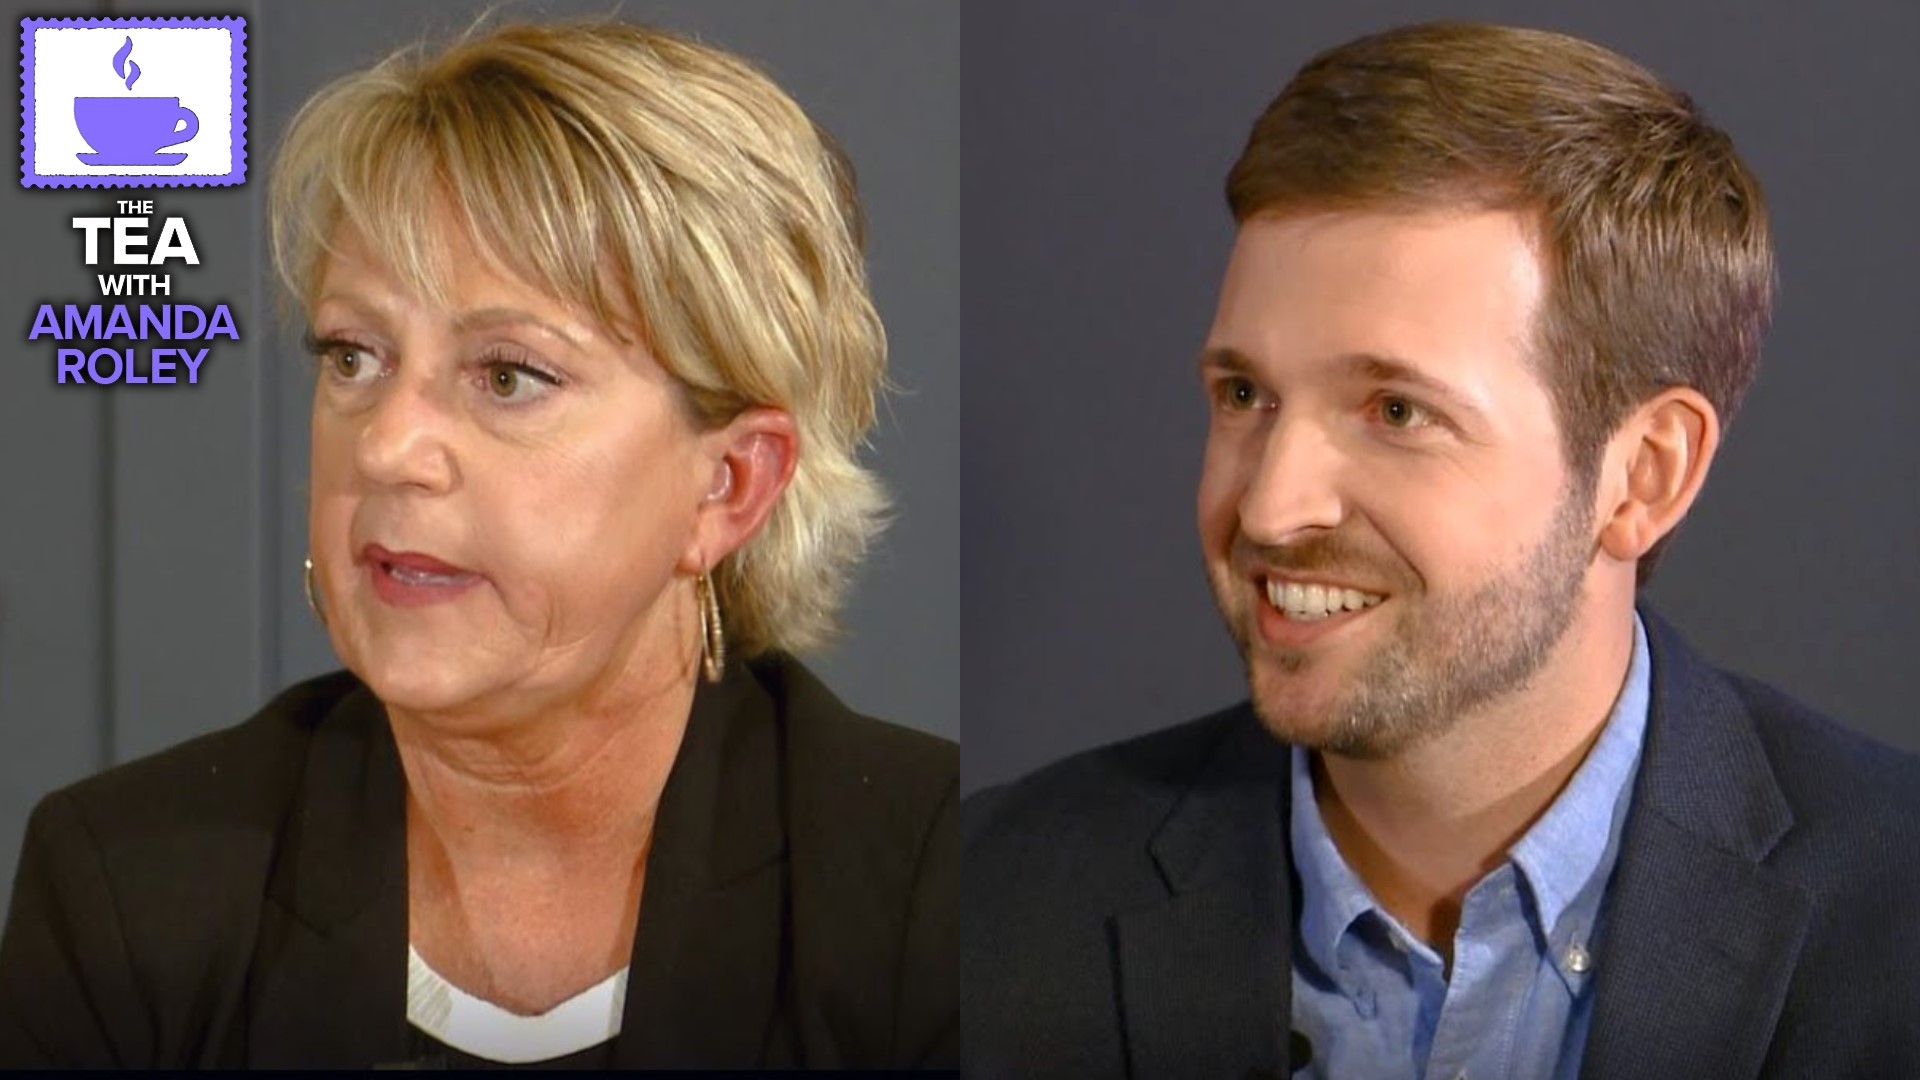 Spokane County Commission District 1 candidates Kim Plese and Chris Jordan sit down for 'The Tea with Amanda Roley' to talk about their vision for the County.